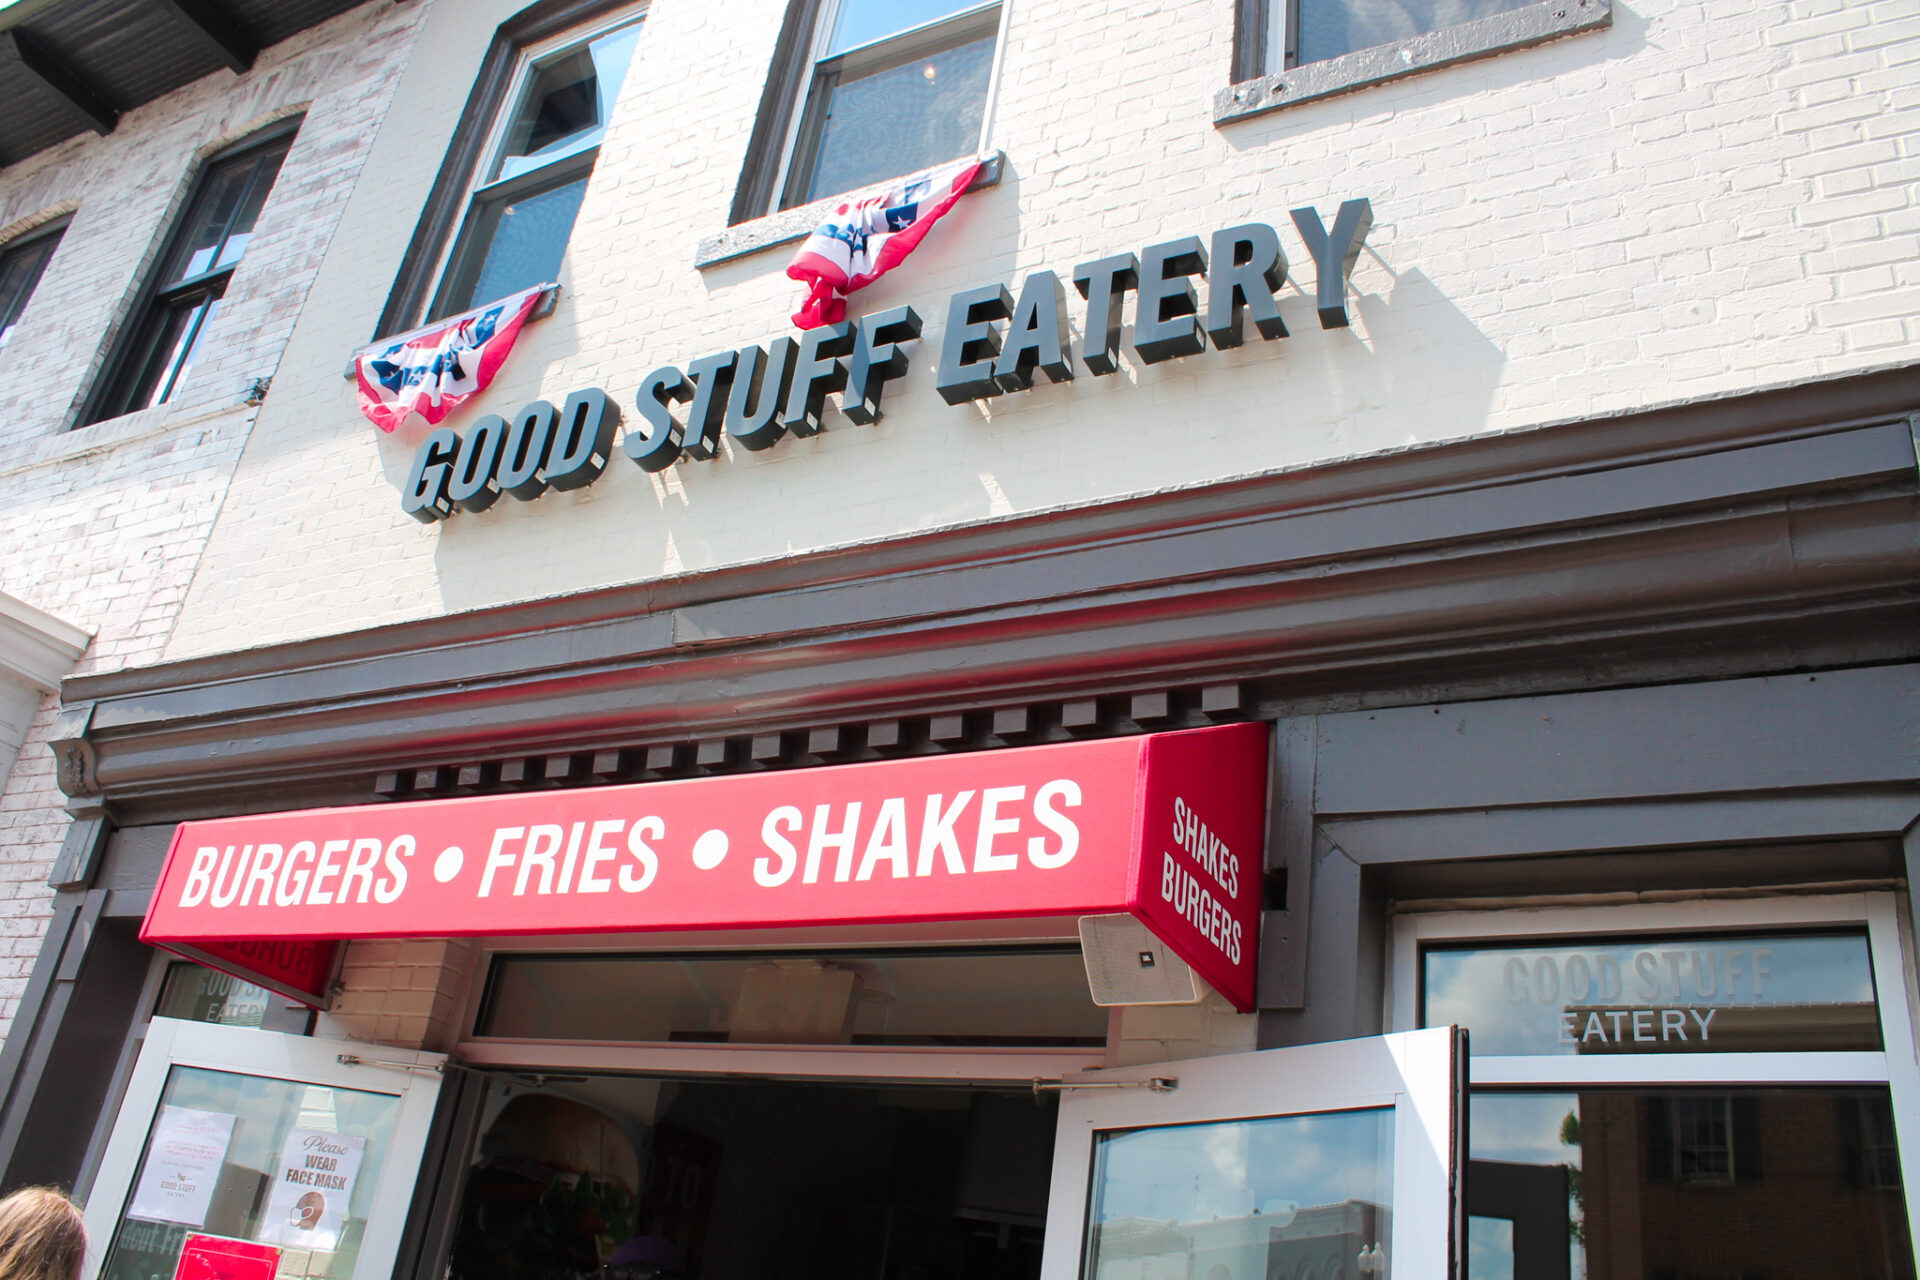 An exterior shot of Good Stuff Eatery in Georgetown, DC. My husband ordered the Obama burger with rosemary fries. Yummy!